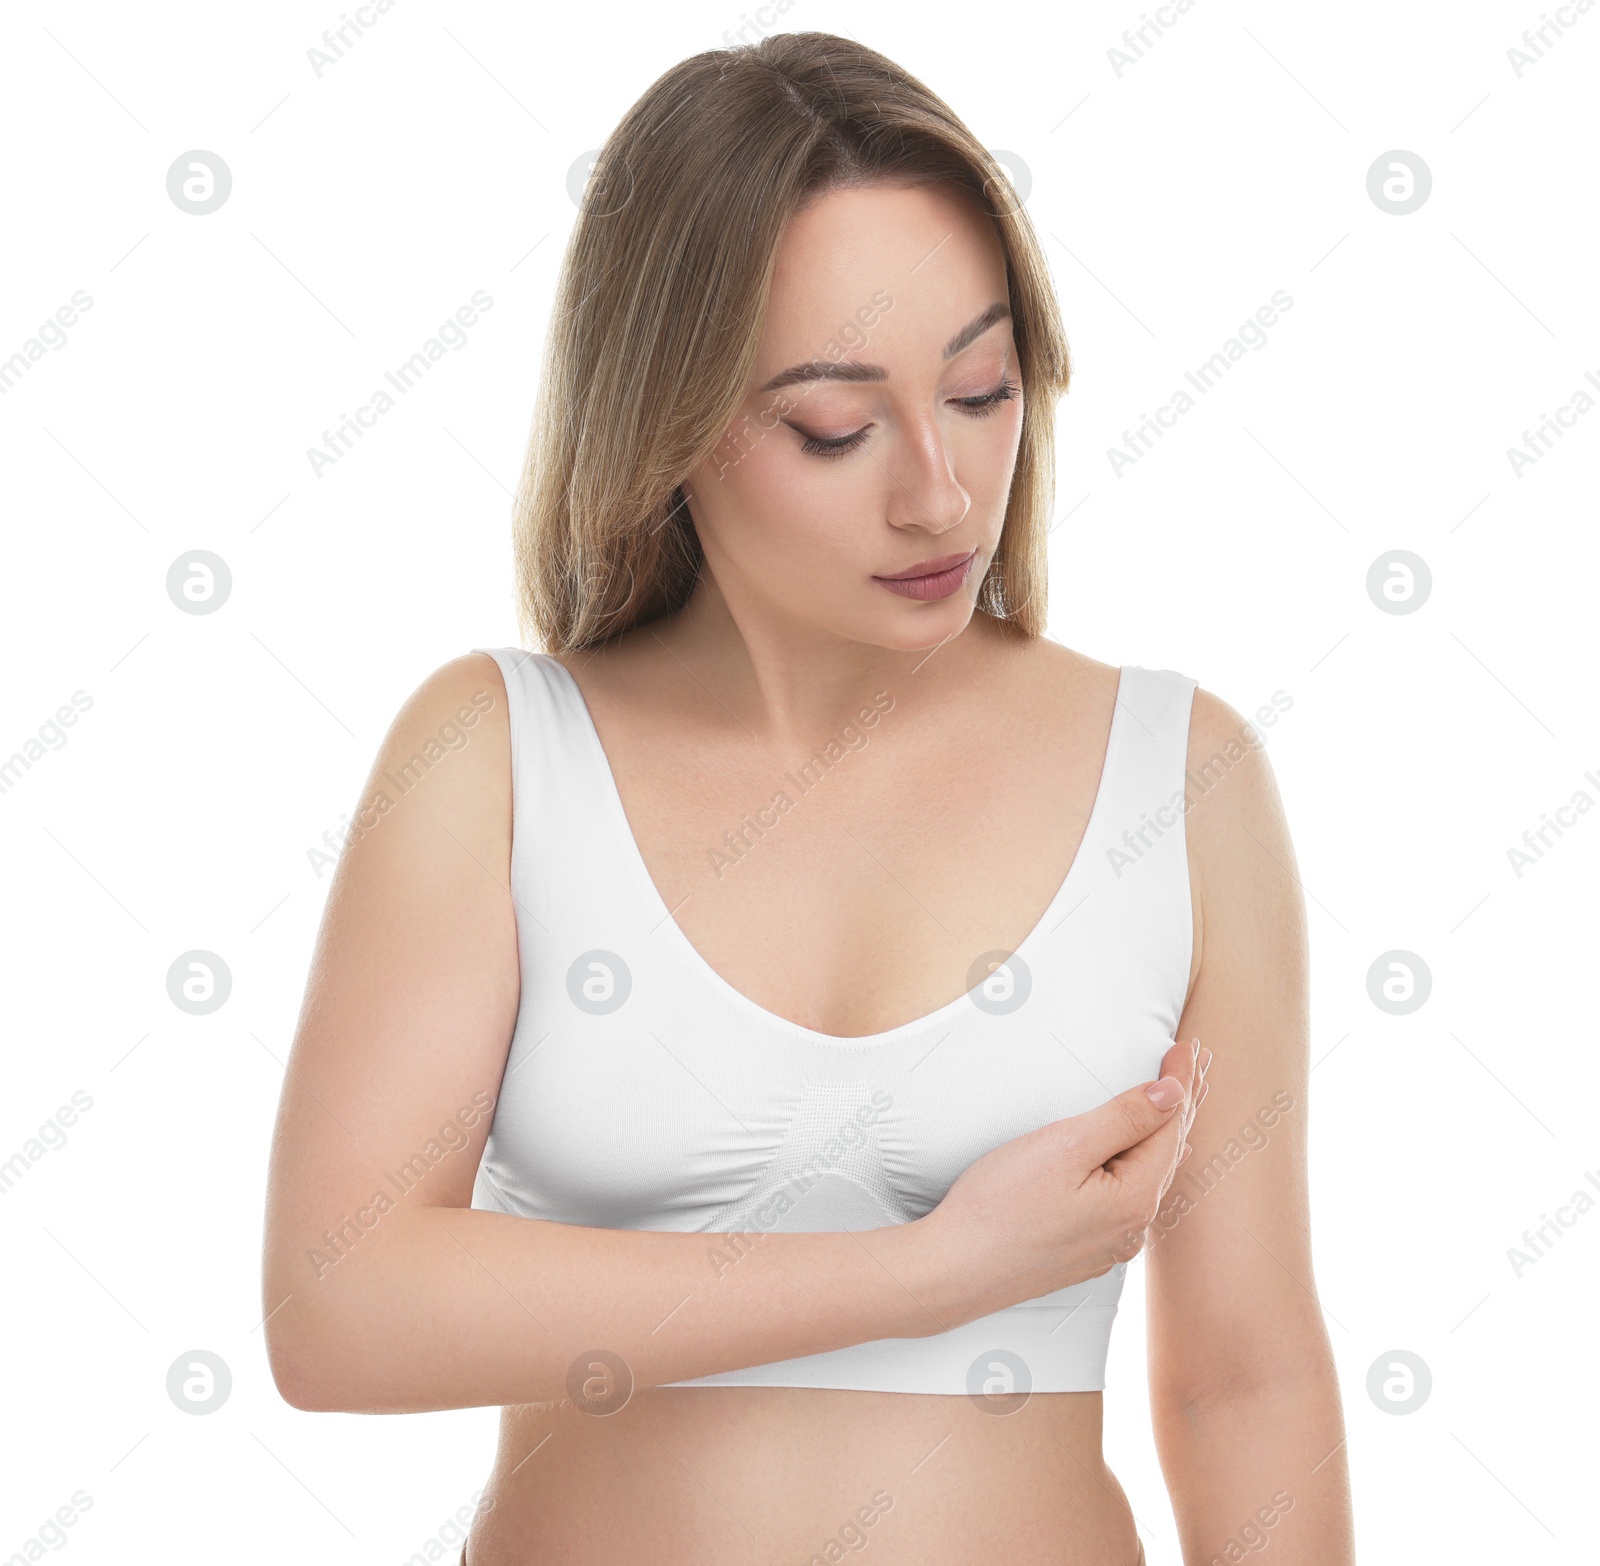 Photo of Mammology. Young woman doing breast self-examination on white background